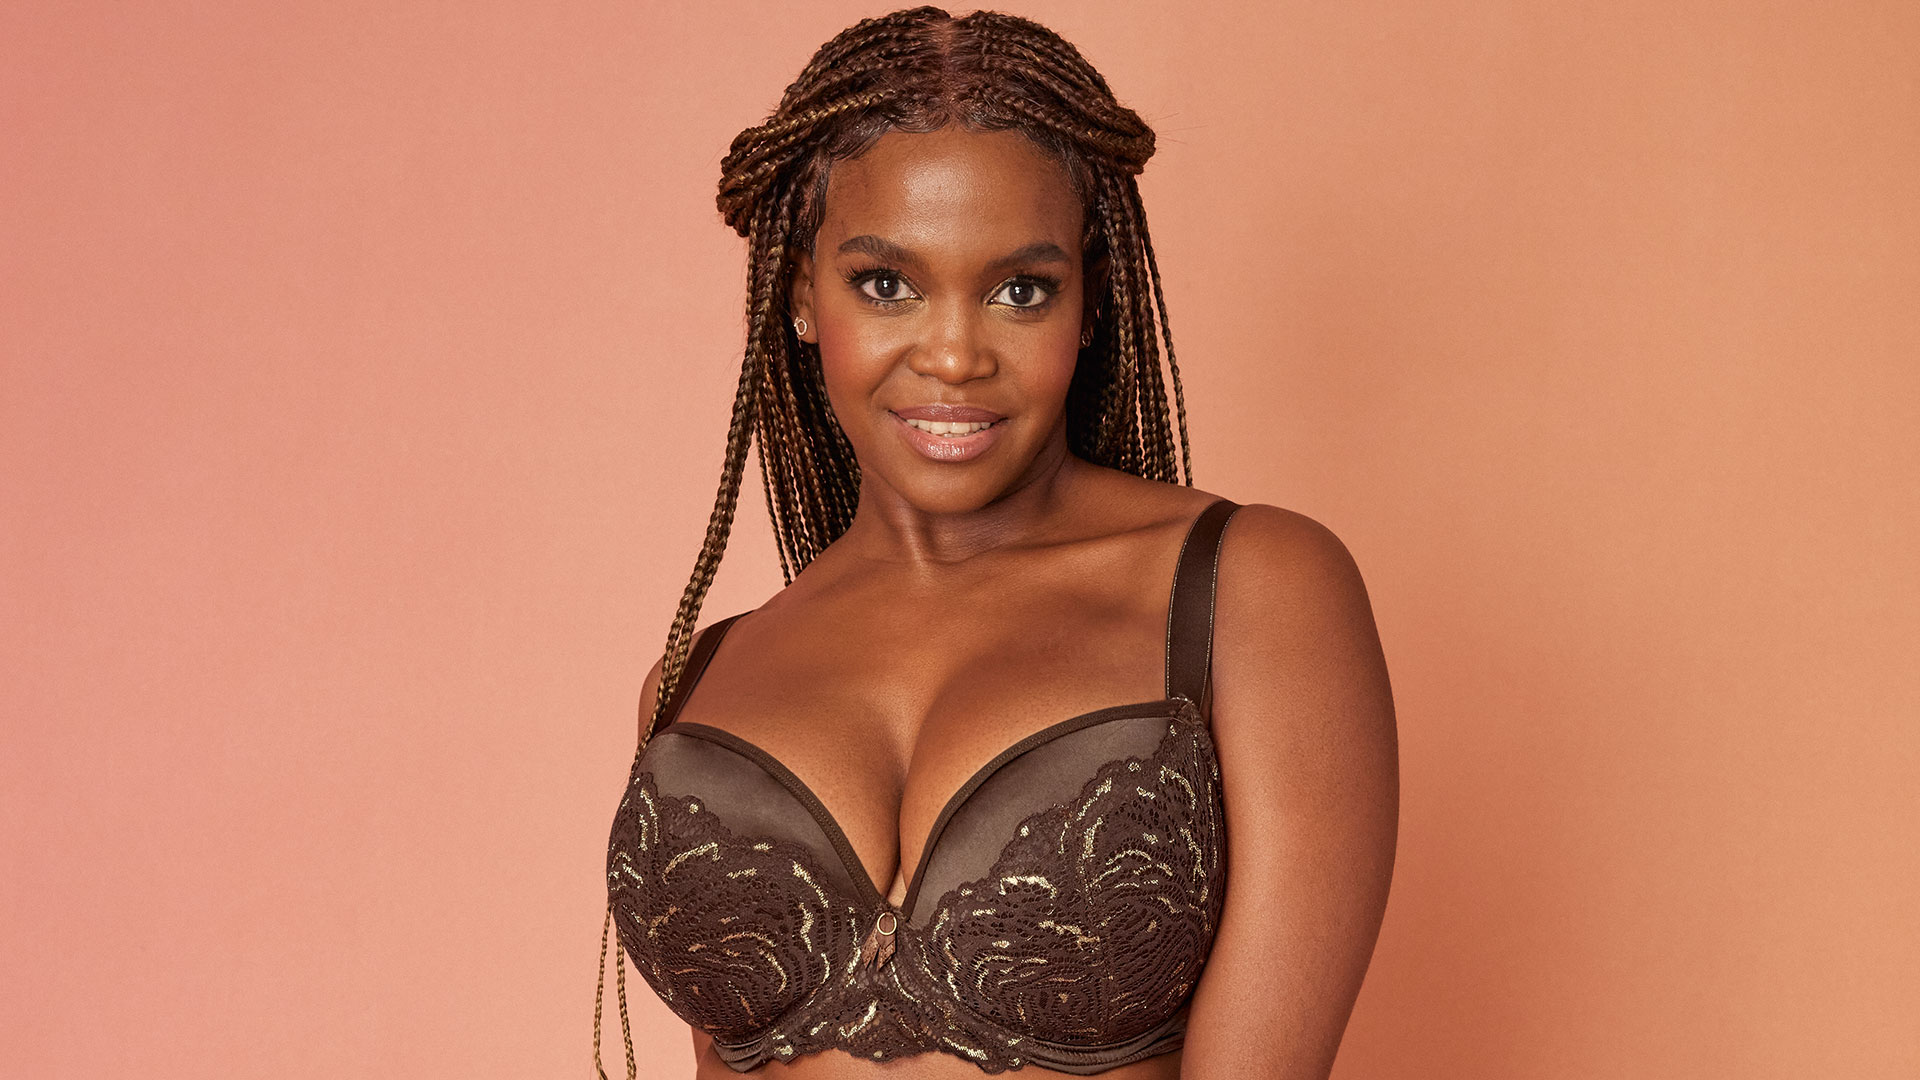 “Meet Oti Mabuse: The Talented Dancer and Her Adorable Children Revealed” – Exclusive Insights from The US Sun